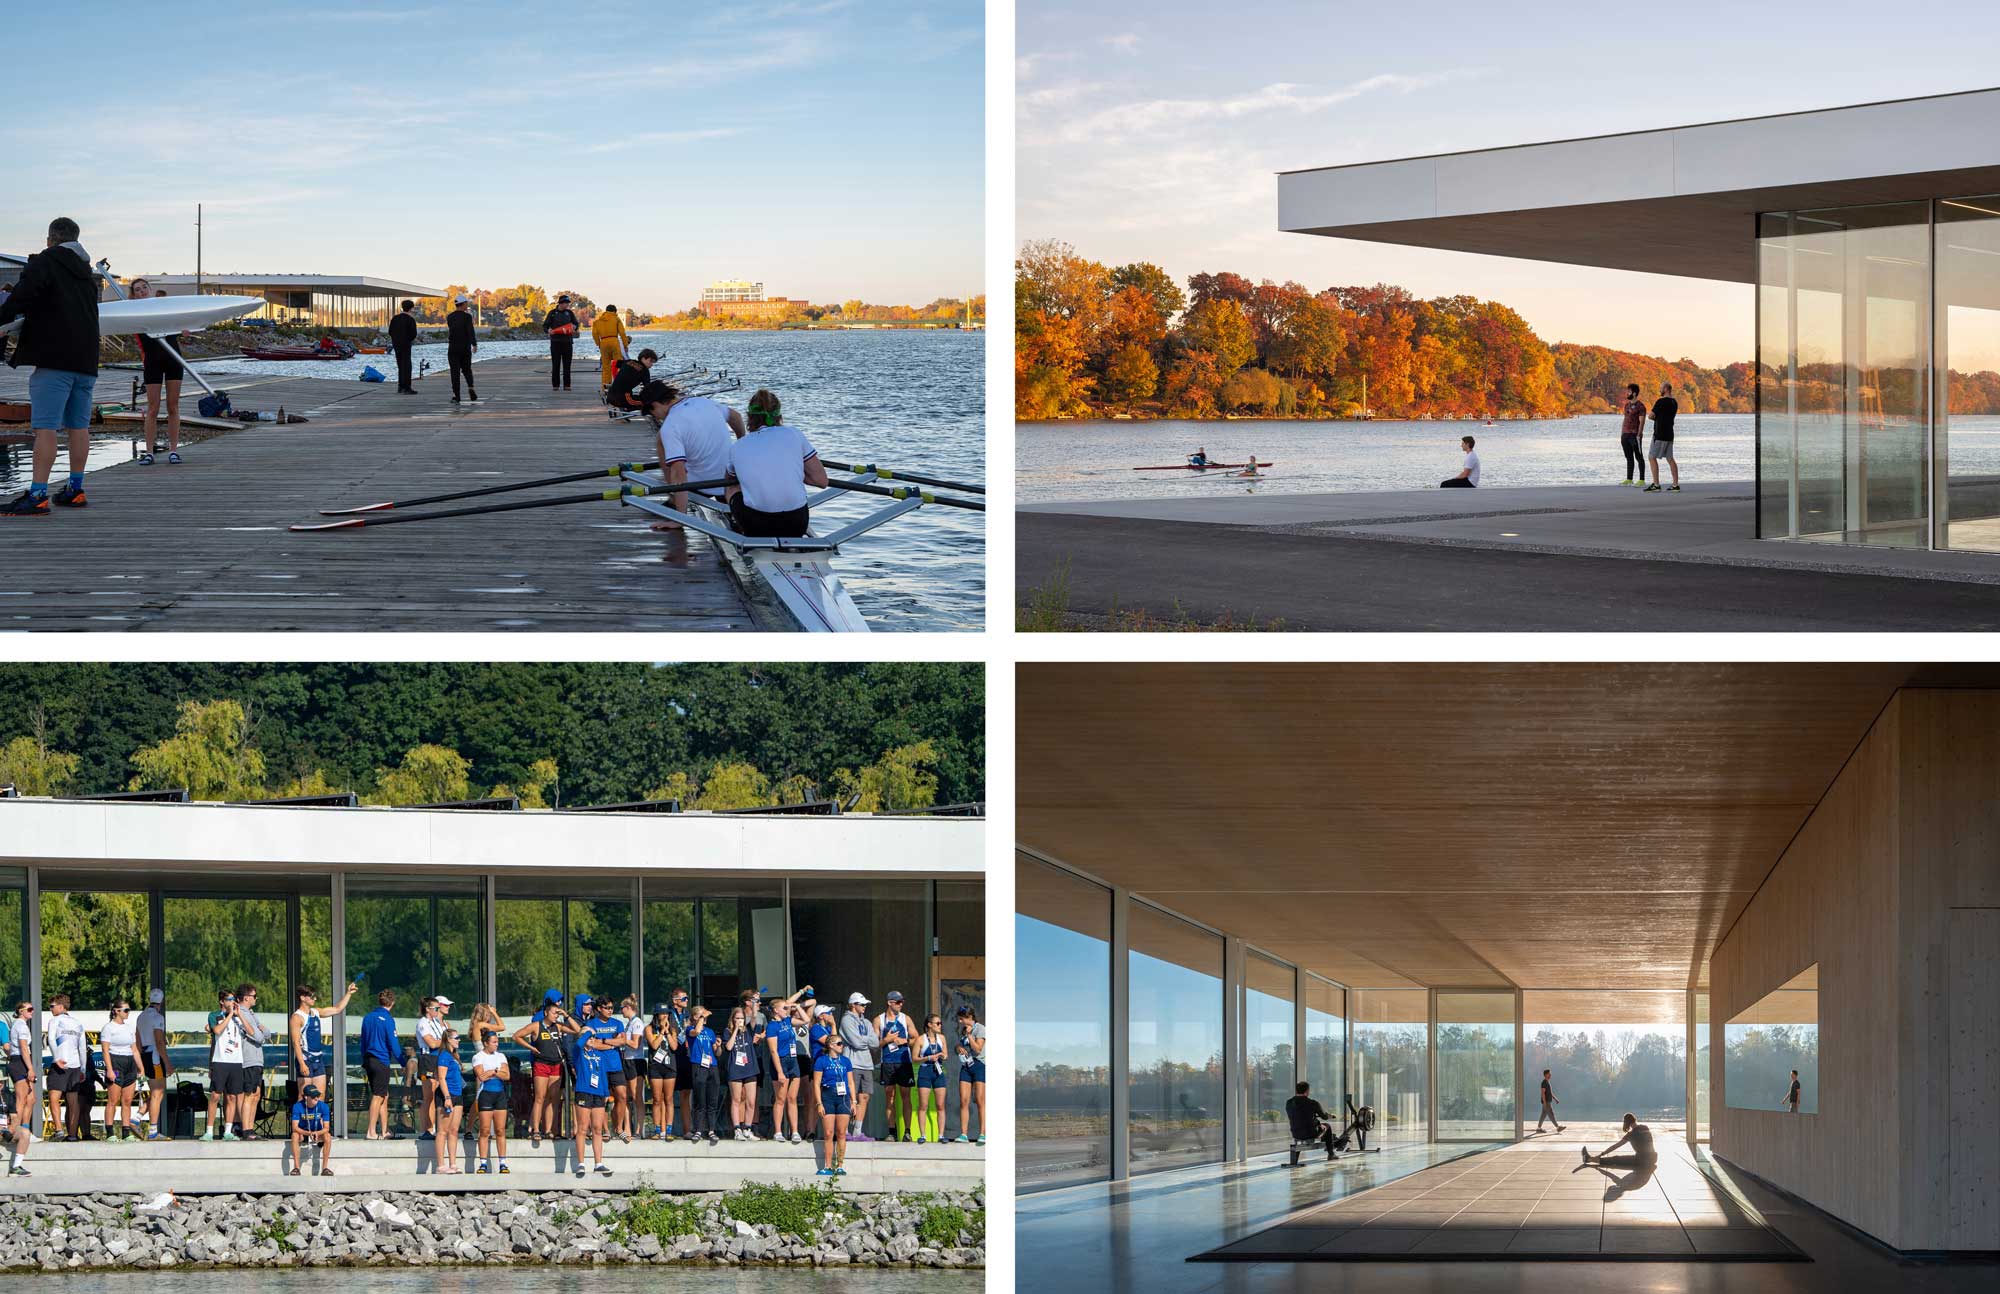 A collage of four images showing the NCRC in different contexts: rowers preparing for a regatta, visitors viewing the water under the building's canopy, a crowd gathered under the canopy during a regatta, and a yoga session in the building